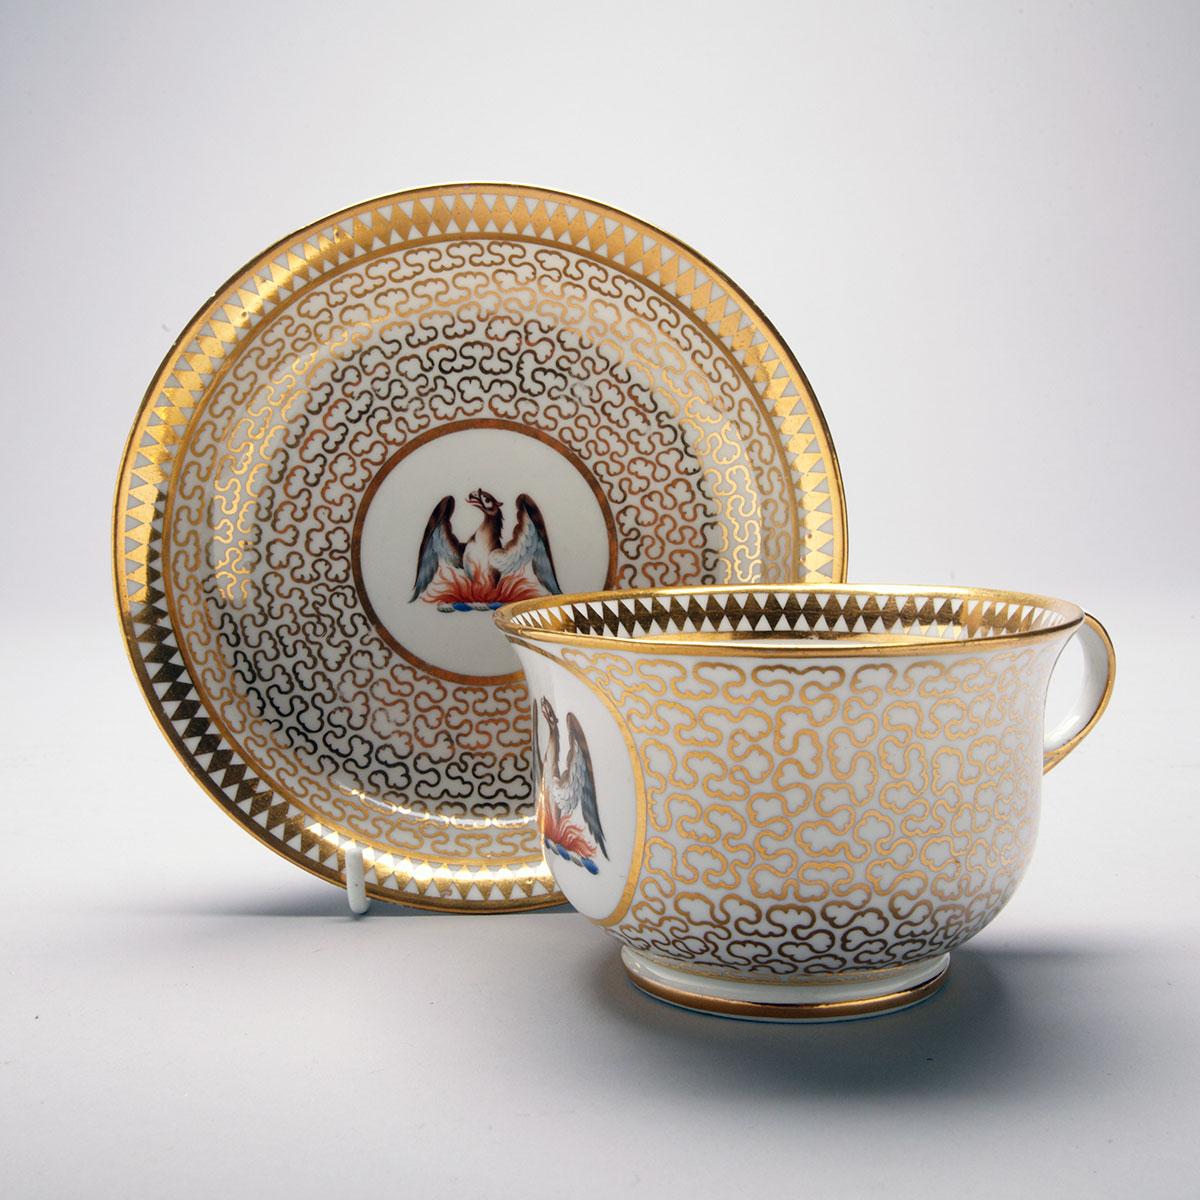 Chamberlains Worcester Gilt Vermiculated Ground Armorial Breakfast Cup and Saucer, c.1815